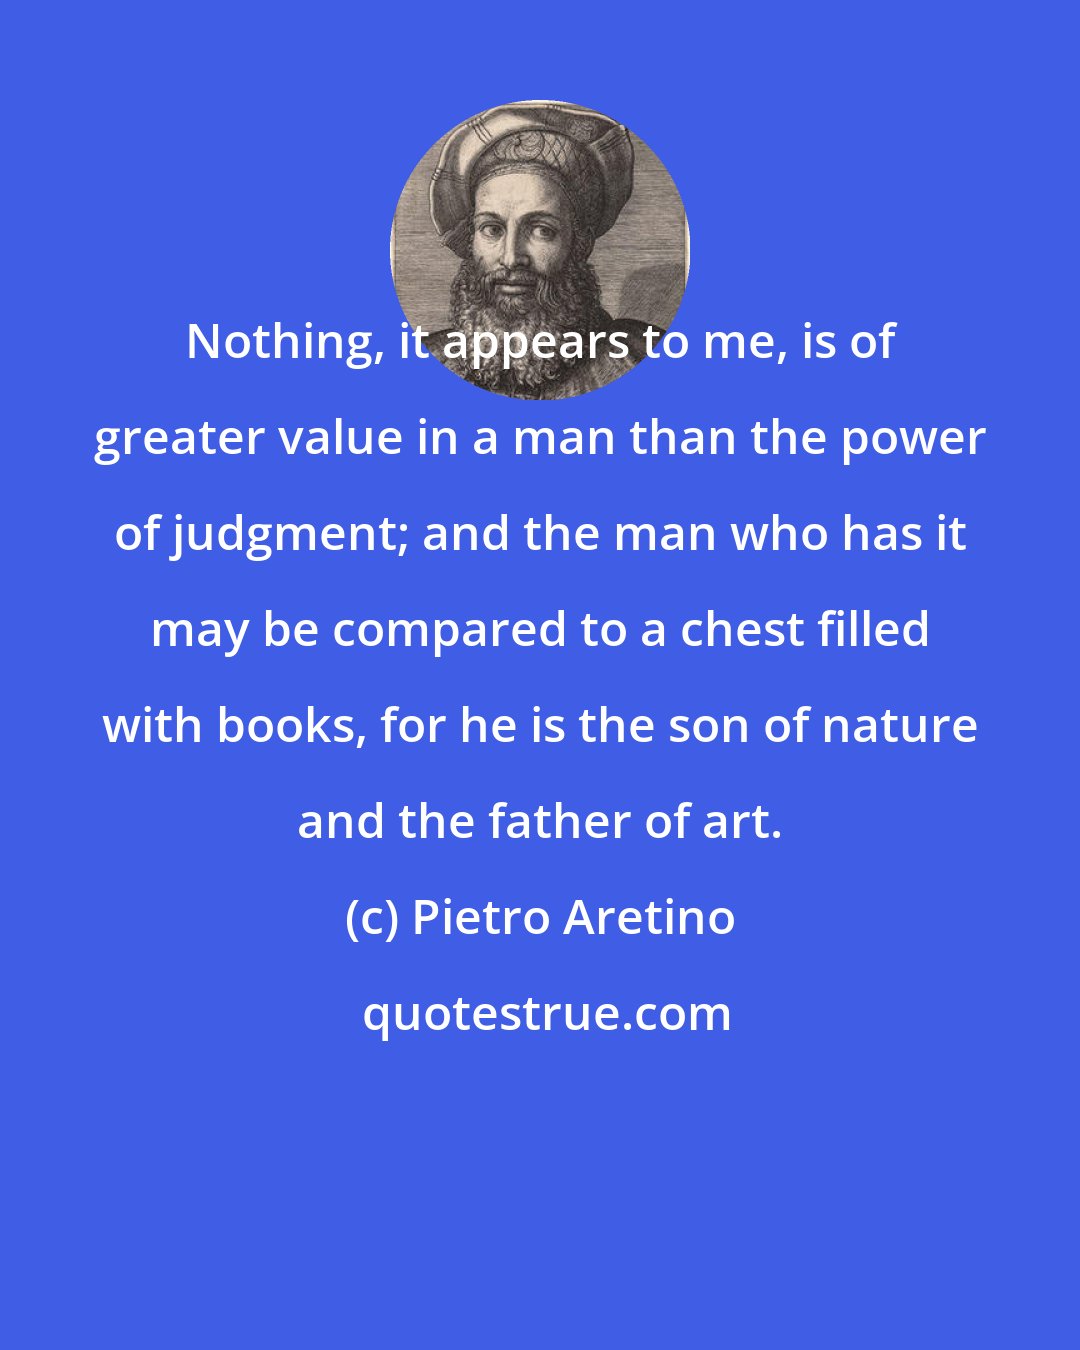 Pietro Aretino: Nothing, it appears to me, is of greater value in a man than the power of judgment; and the man who has it may be compared to a chest filled with books, for he is the son of nature and the father of art.